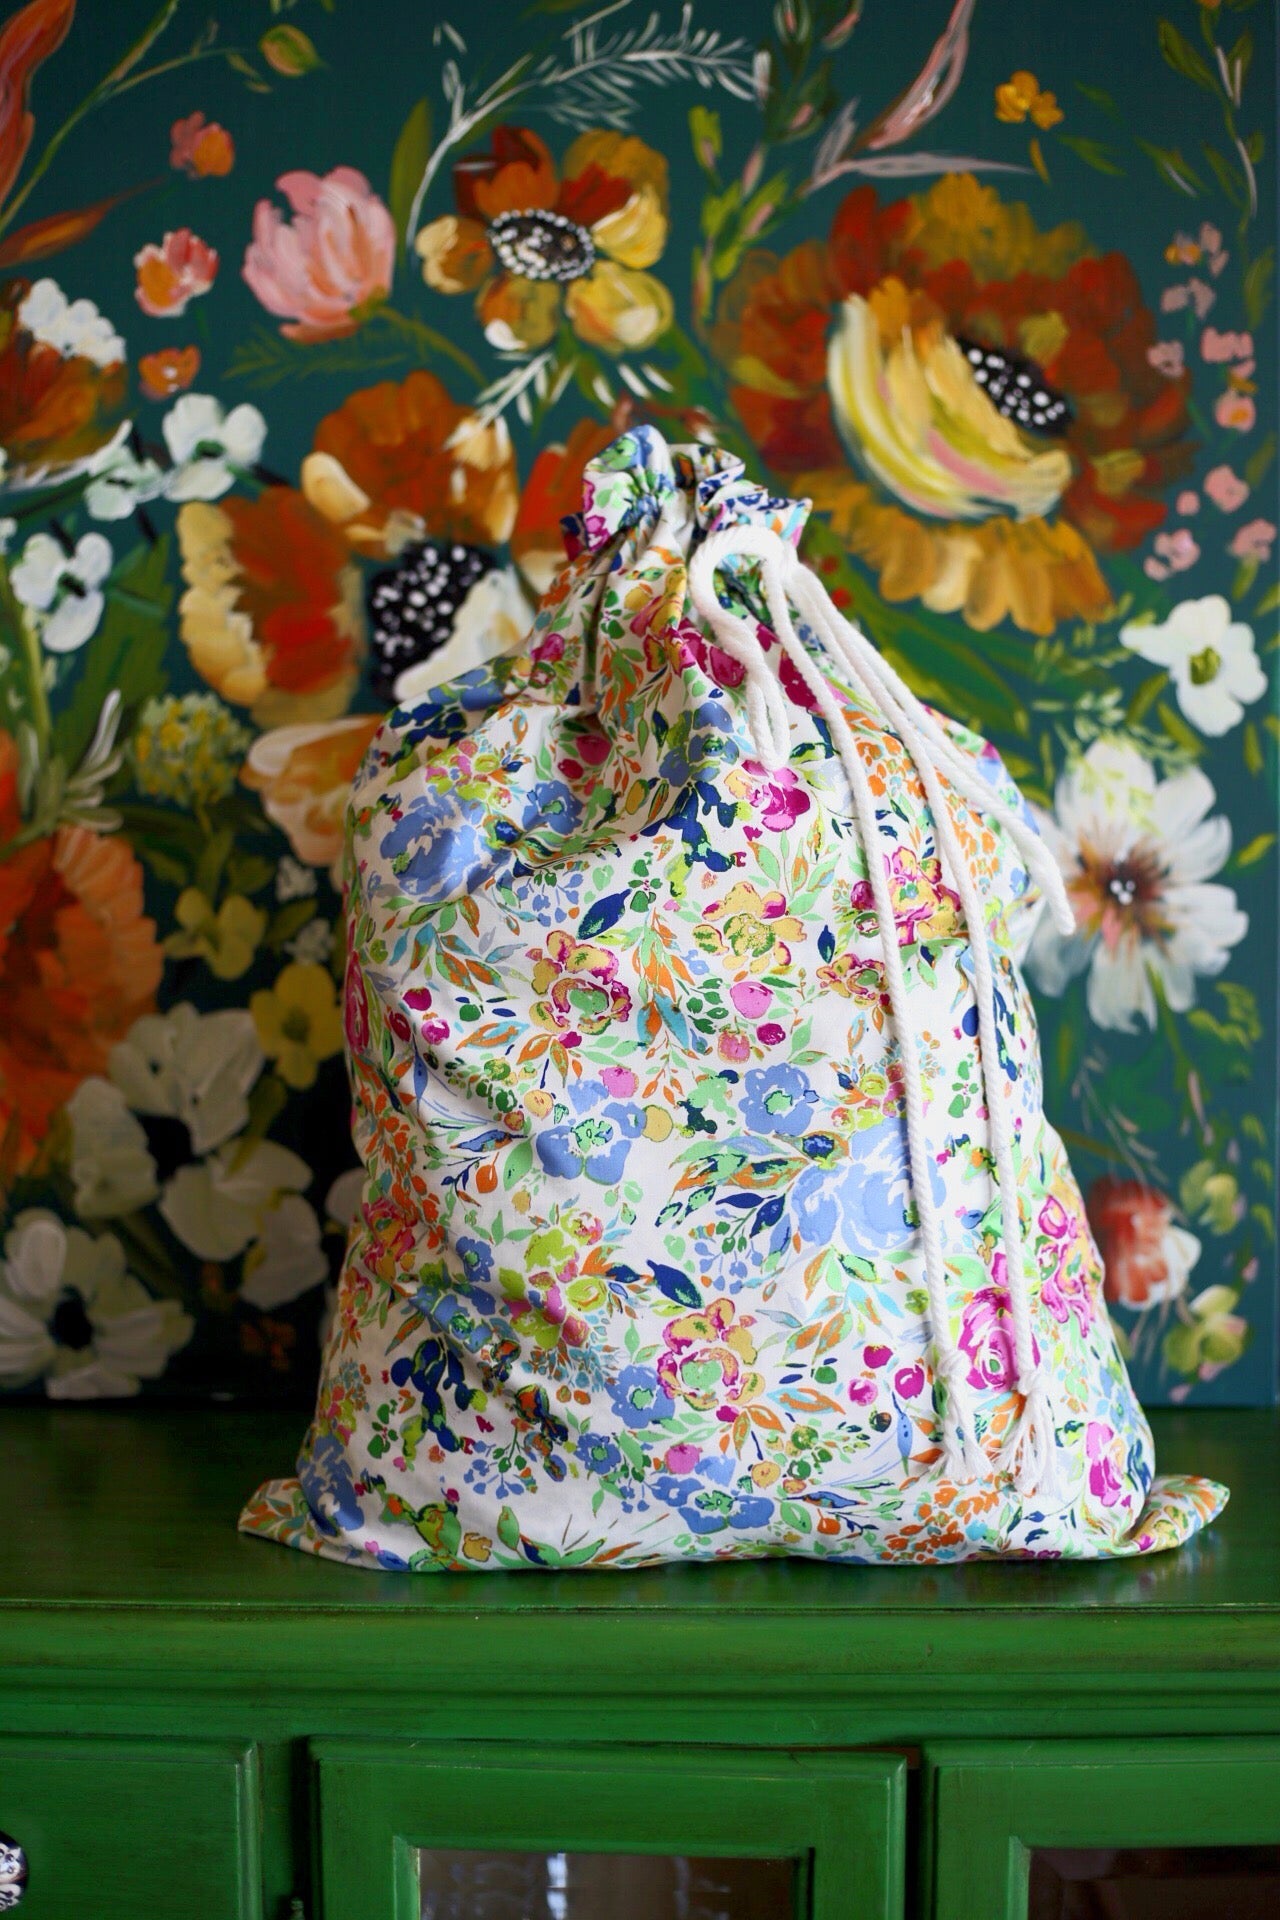 Lined Drawstring bag by Bari J. in Indigo and Aster Fabrics for Art Gallery Fabrics laundry bag